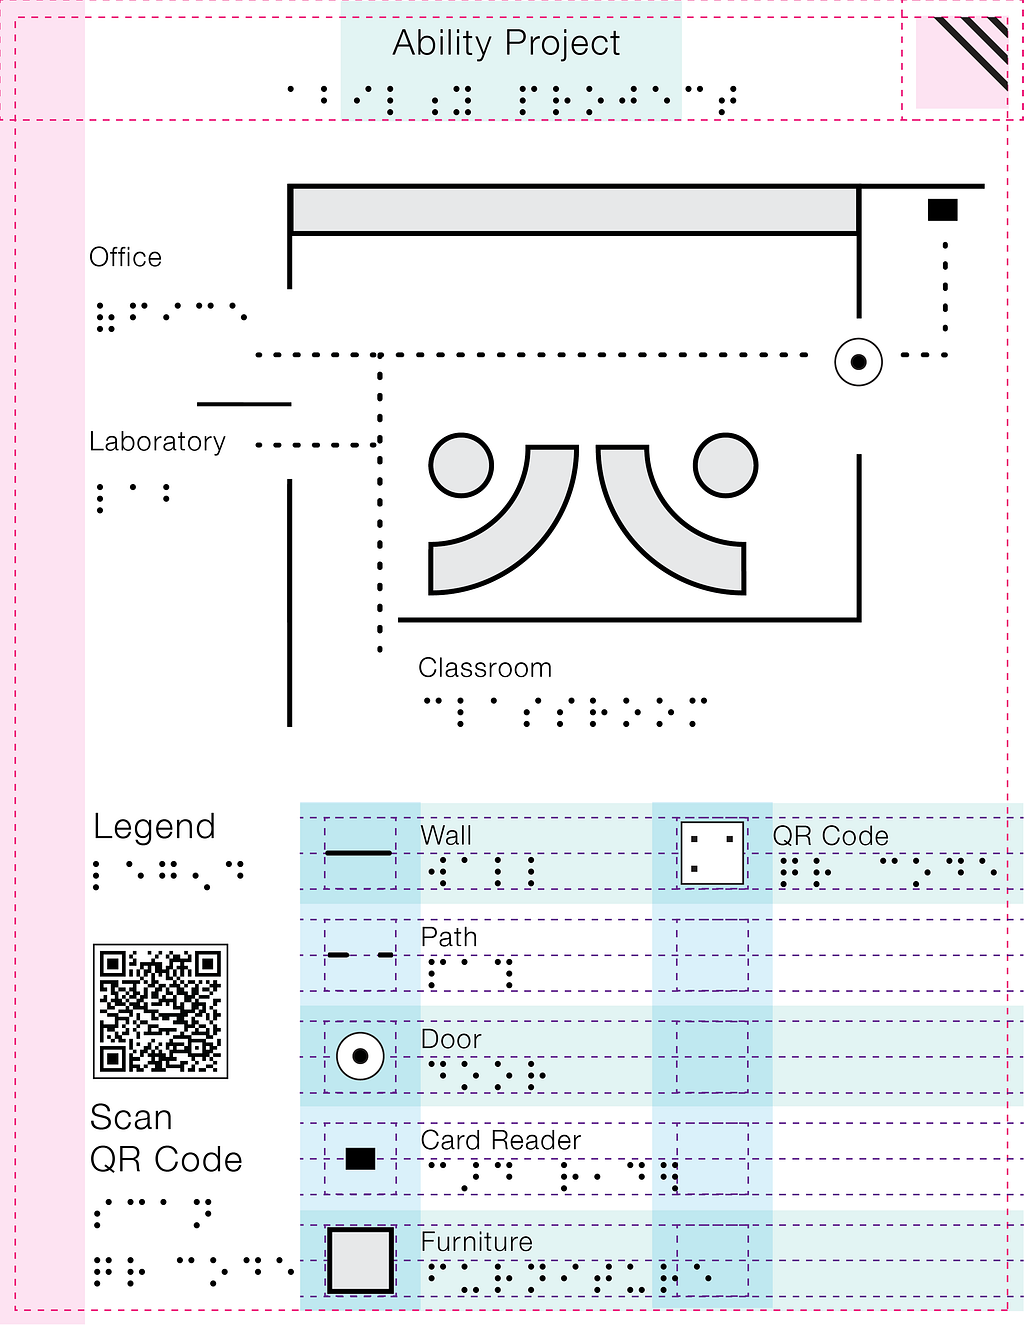 Vector-based Ability Project tactile map file with spacing and margin guidelines, designed in software such as Figma or Illustrator.